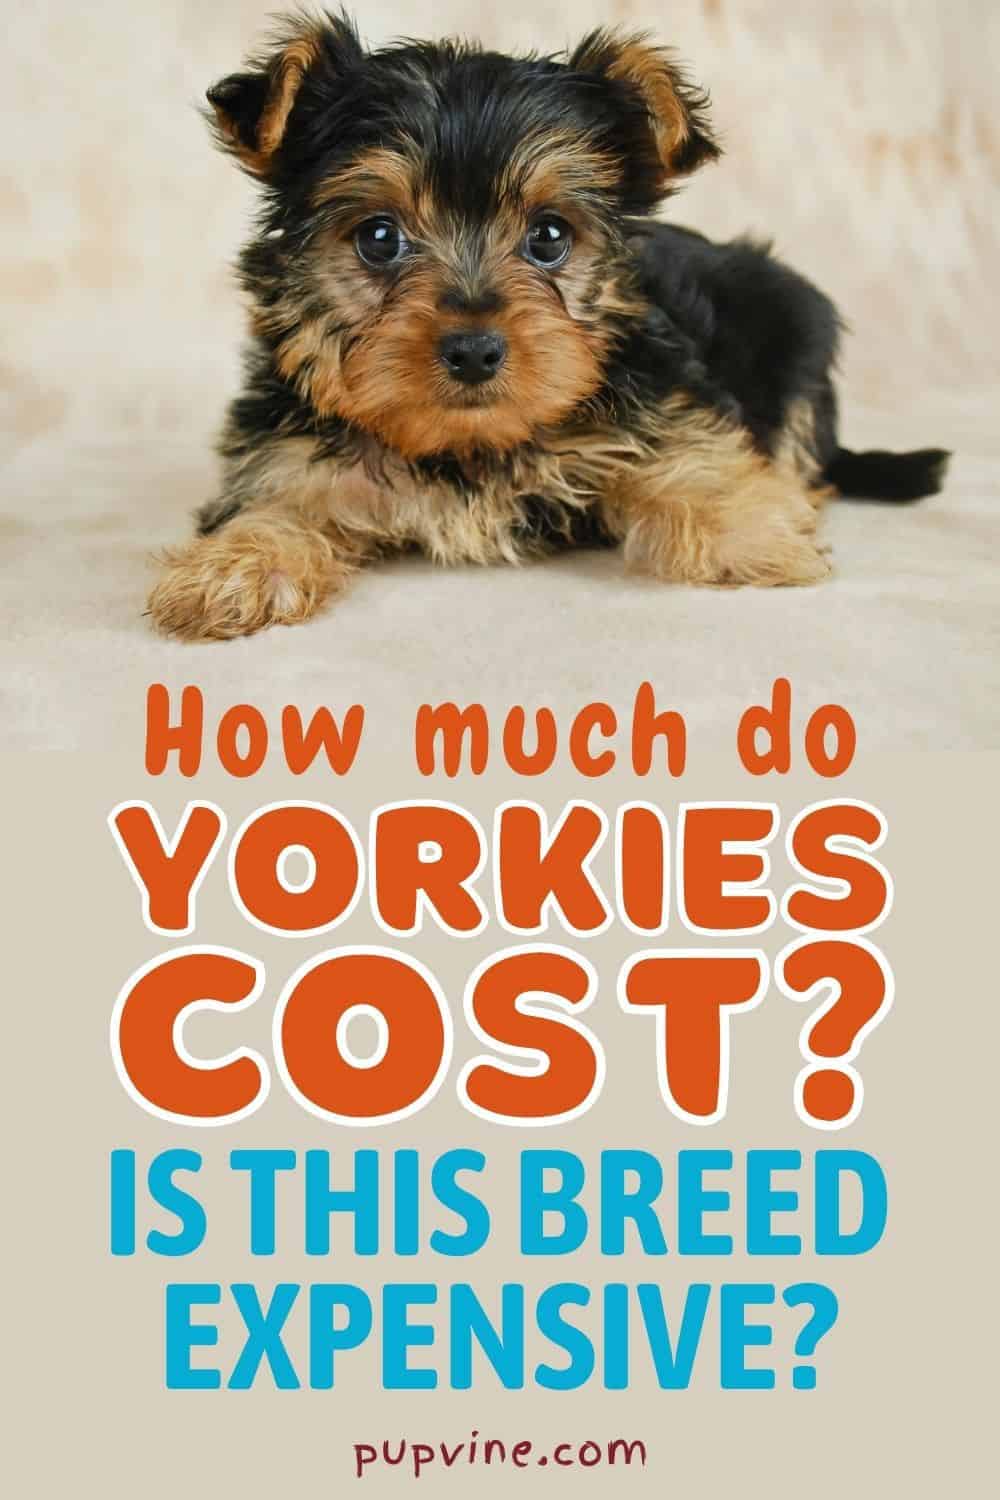 How Much Do Yorkies Cost: Is This Breed Expensive?